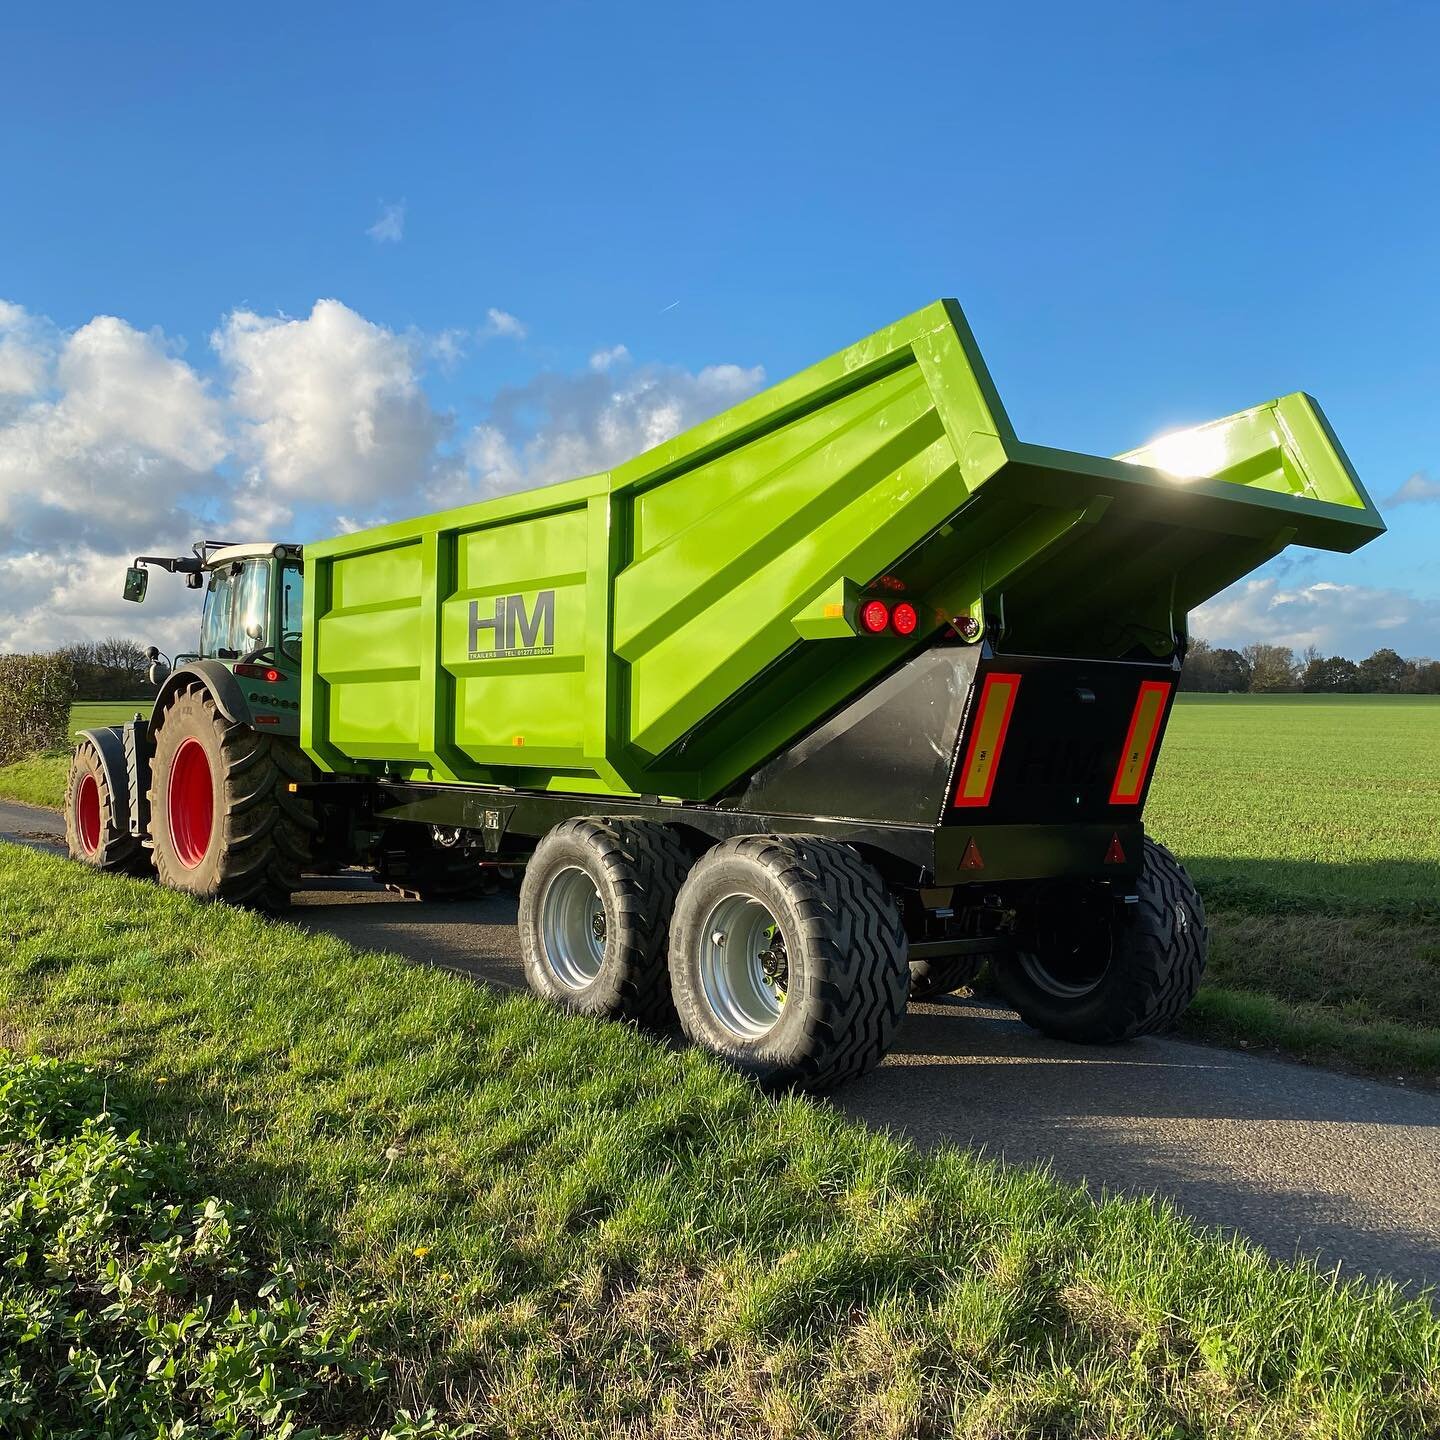 Our HMDT Agri dump range is available in the following capacities: 18, 16, 14, 12 &amp; 10t. With a multitude of optional extras and available in HM green or black as standard you can tailor any of our trailers to your exact needs/ requirements! Pict